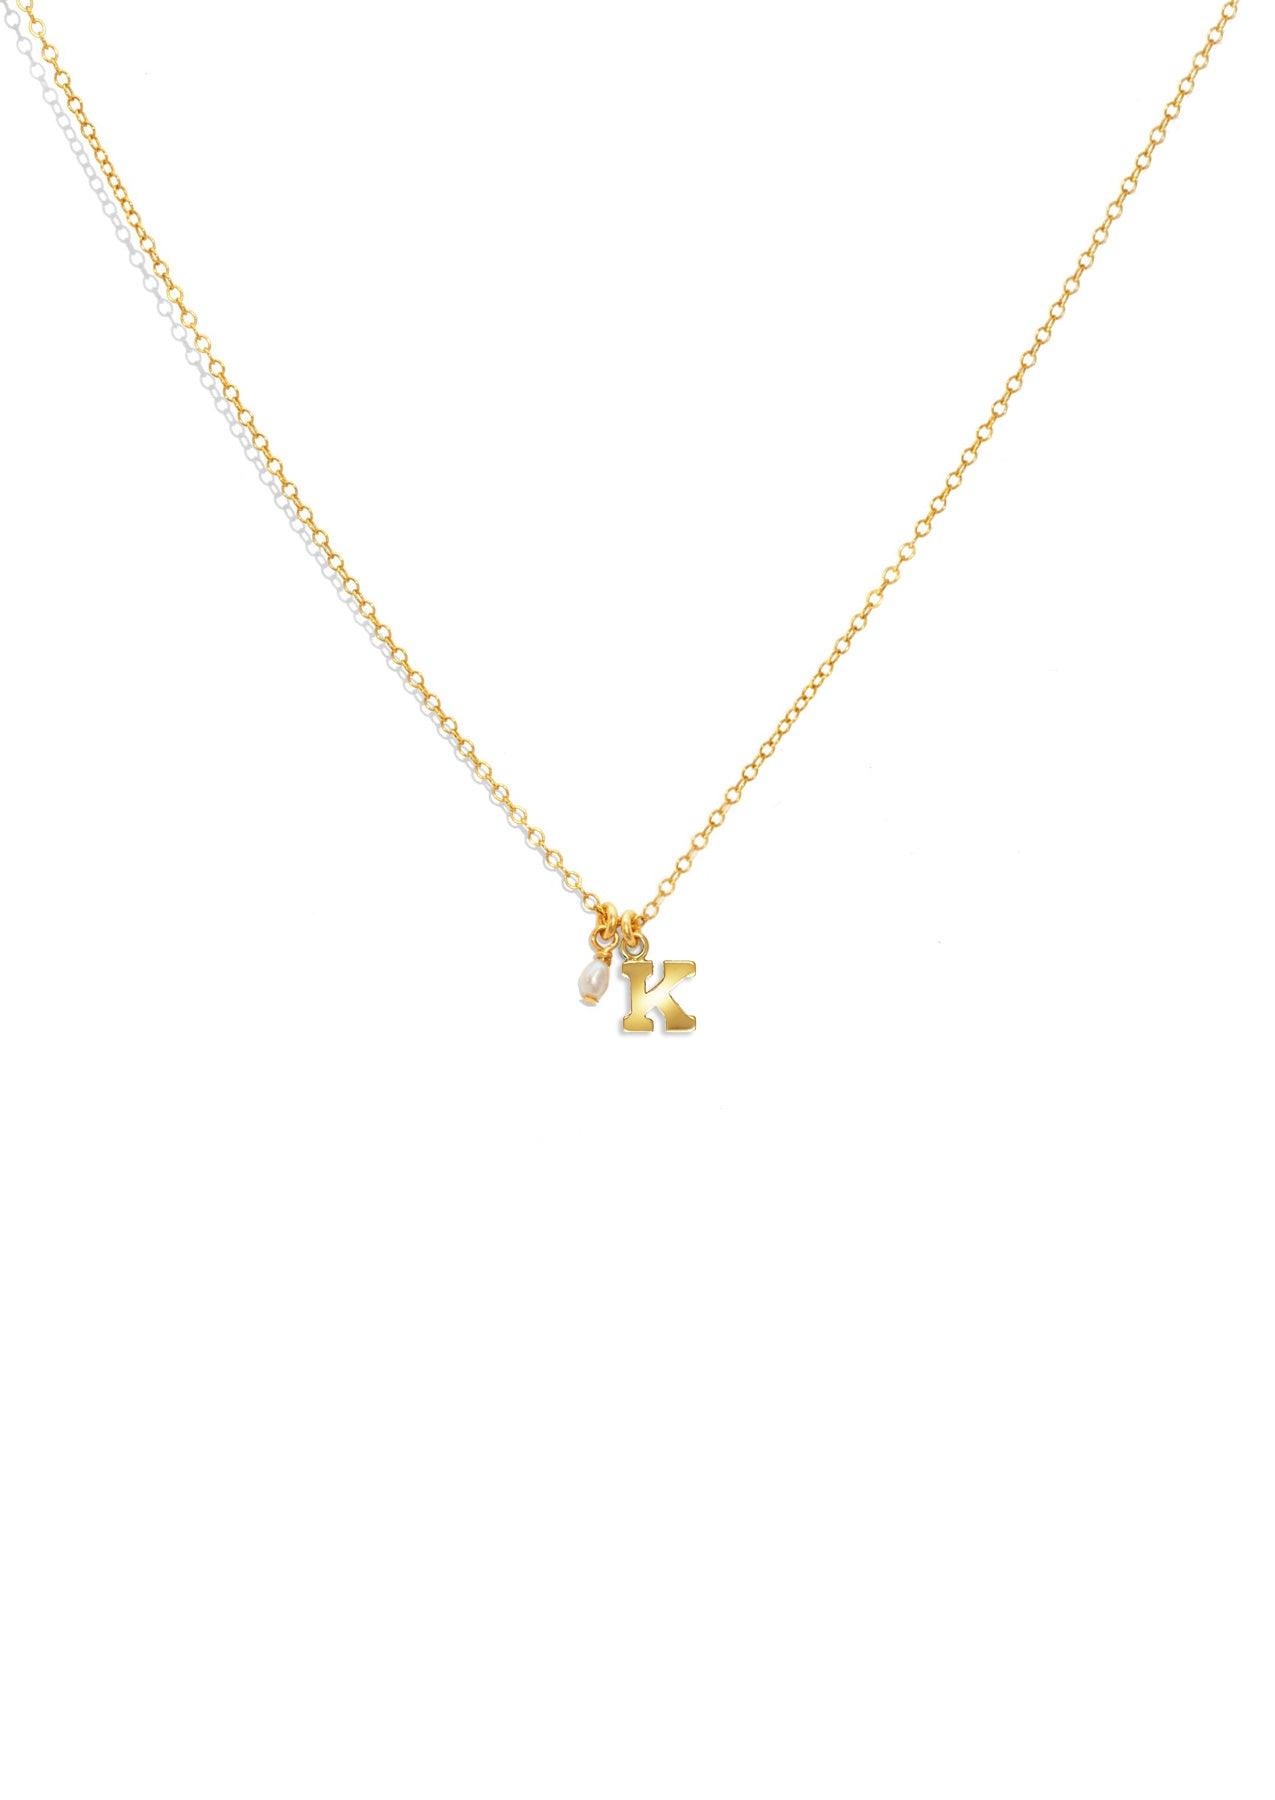 1 Letter Mini Initial Necklace